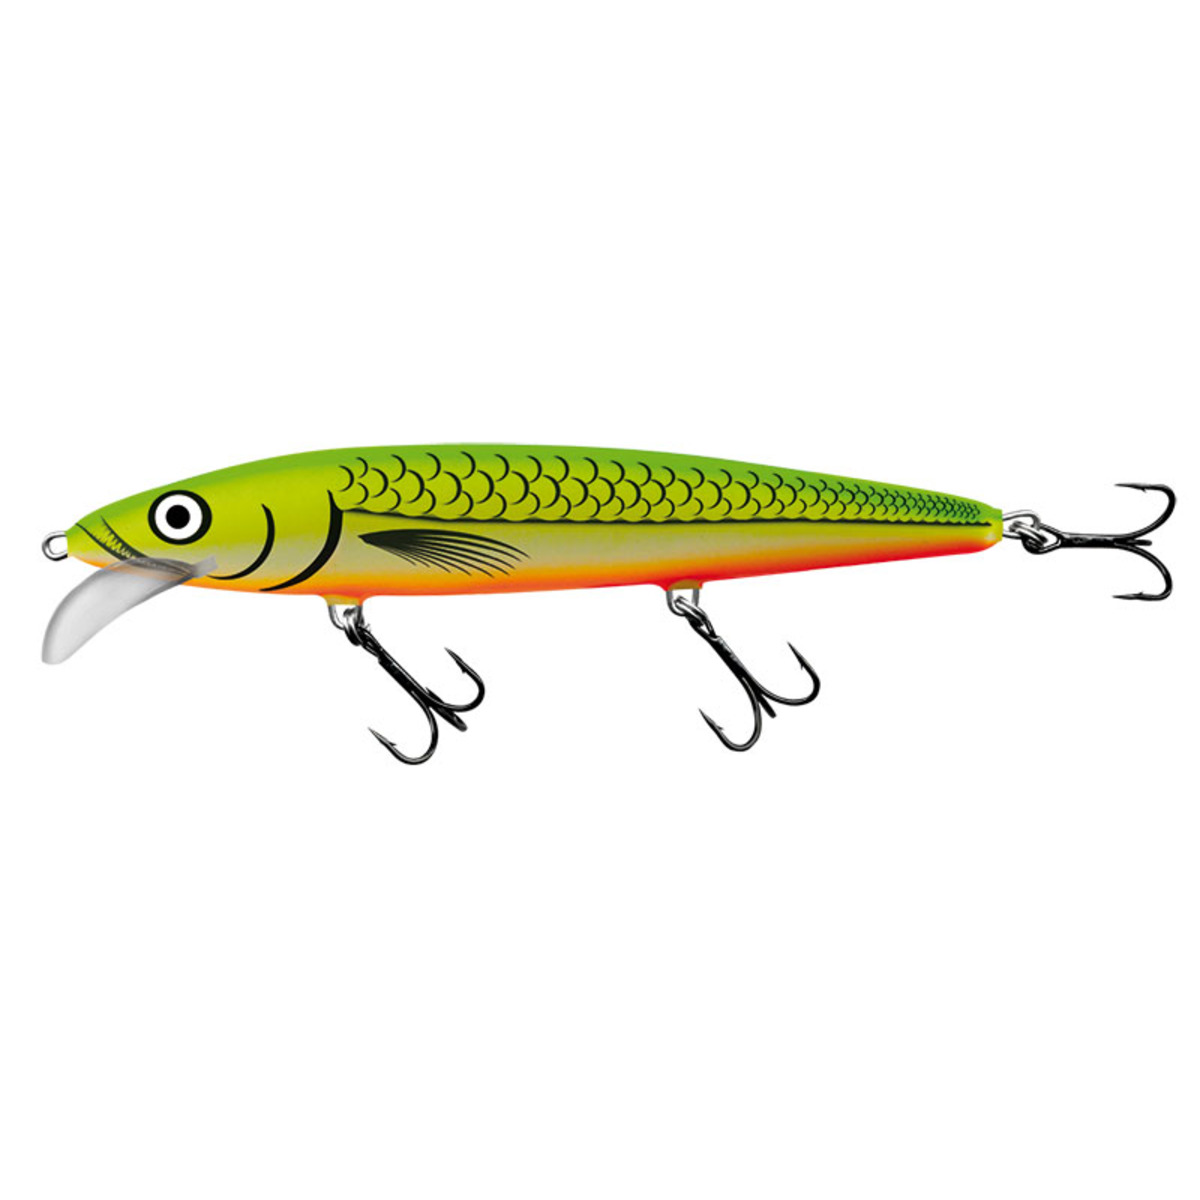 Salmo Whacky Floating - 12 Cm - Glowing Fluorescent Fish